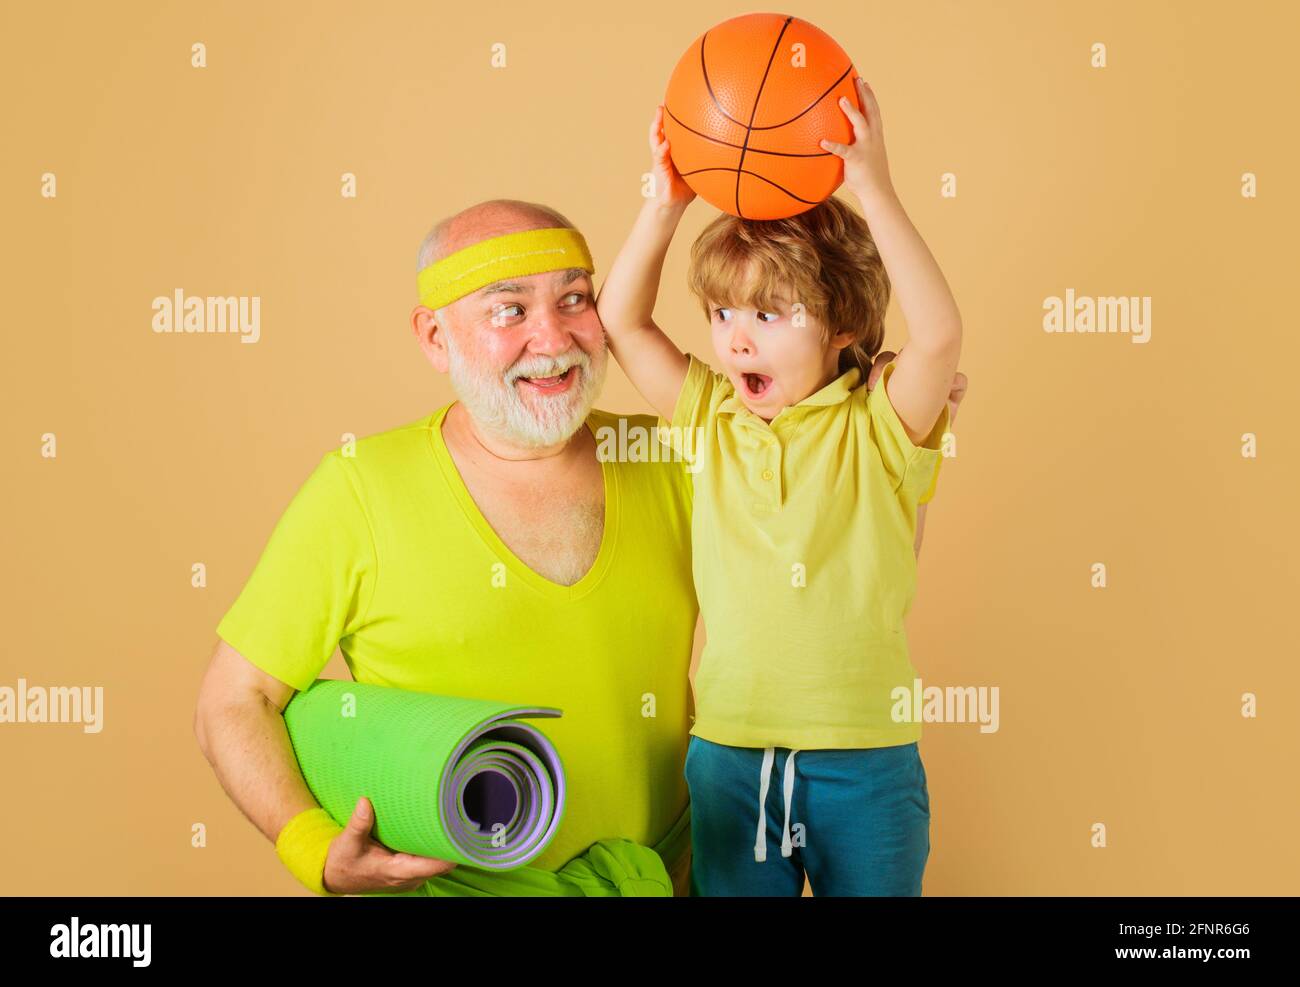 Healthy lifestyle. Grandfather and Grandson sporting. Basketball. Sport for kids. Happy family. Stock Photo